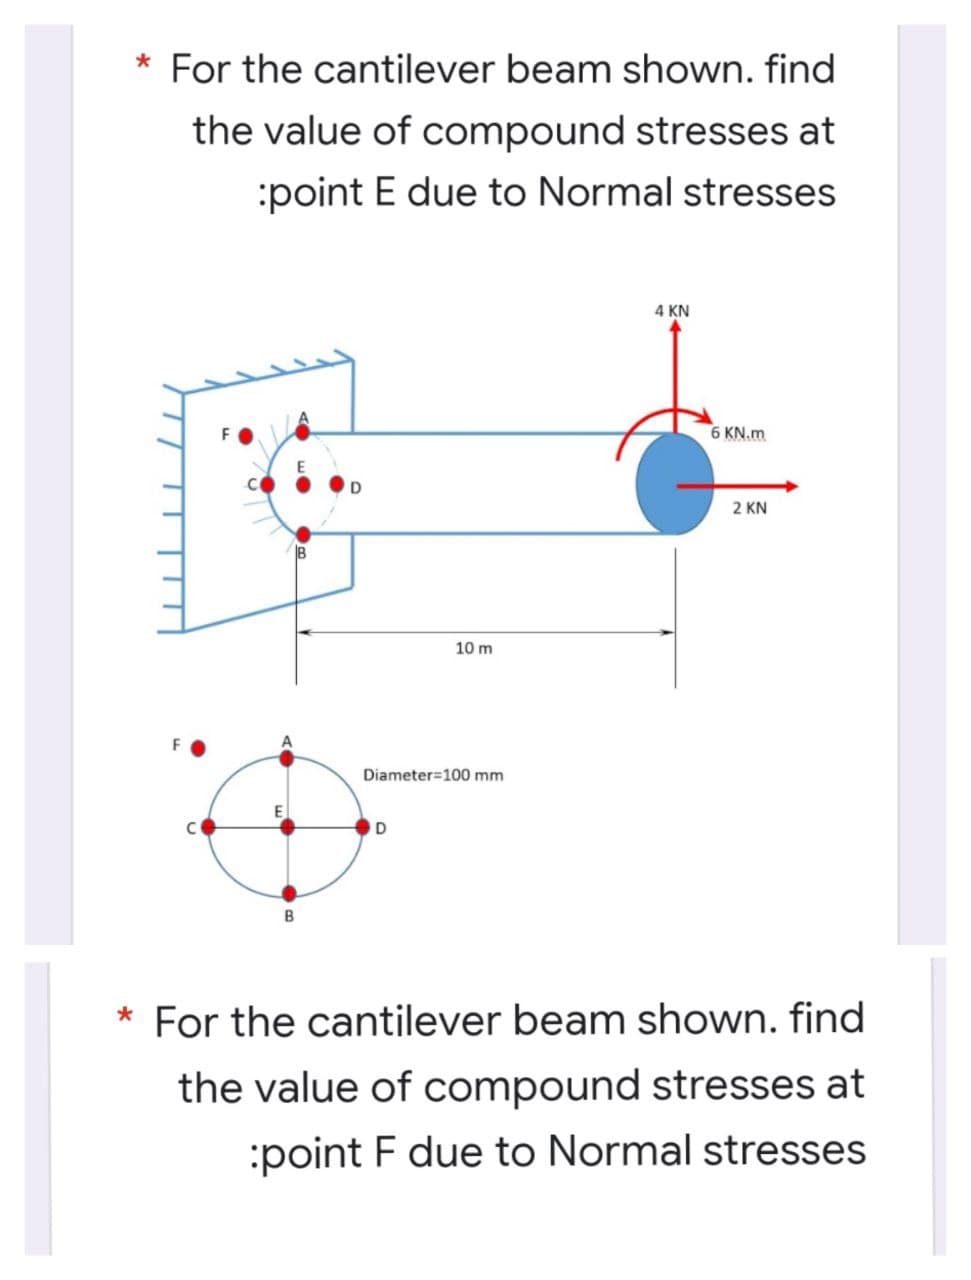 * For the cantilever beam shown. find
the value of compound stresses at
:point E due to Normal stresses
4 KN
6 KN.m
2 KN
10 m
Diameter=100 mm
D
* For the cantilever beam shown. find
the value of compound stresses at
:point F due to Normal stresses
